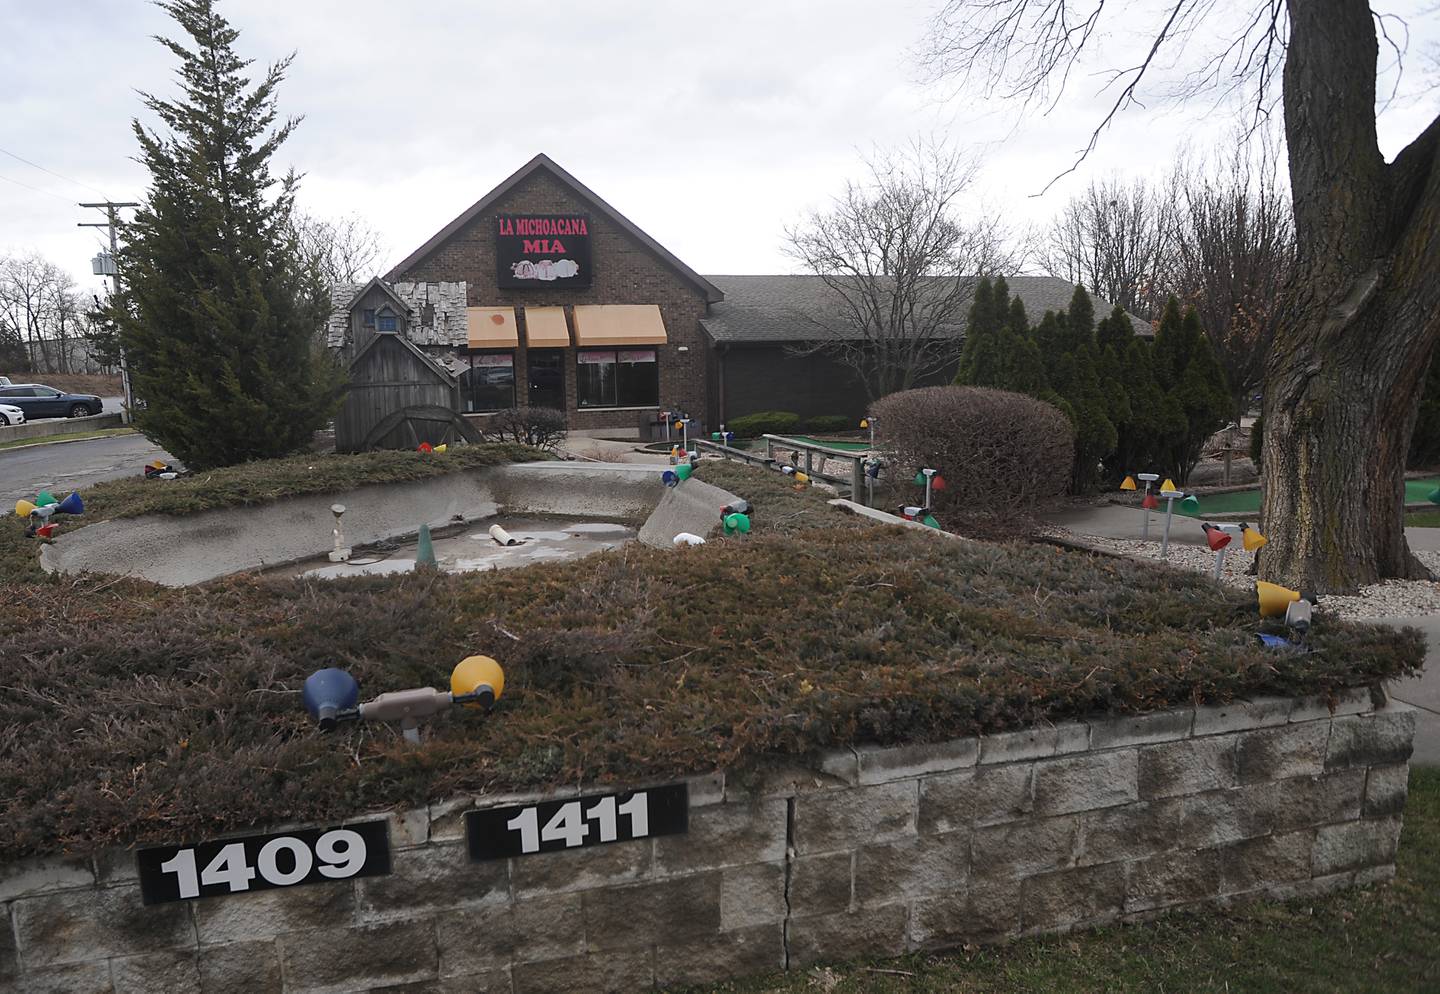 Woodstock City Council approved a special use permit for a marijuana business at 1411 S. Eastwood Drive, in Woodstock, which may help the business open up in town earlier than expected. The permit adjusts its operation to temporarily allow just transportation and infusion for up to two years at the site of the former Golf and Games.